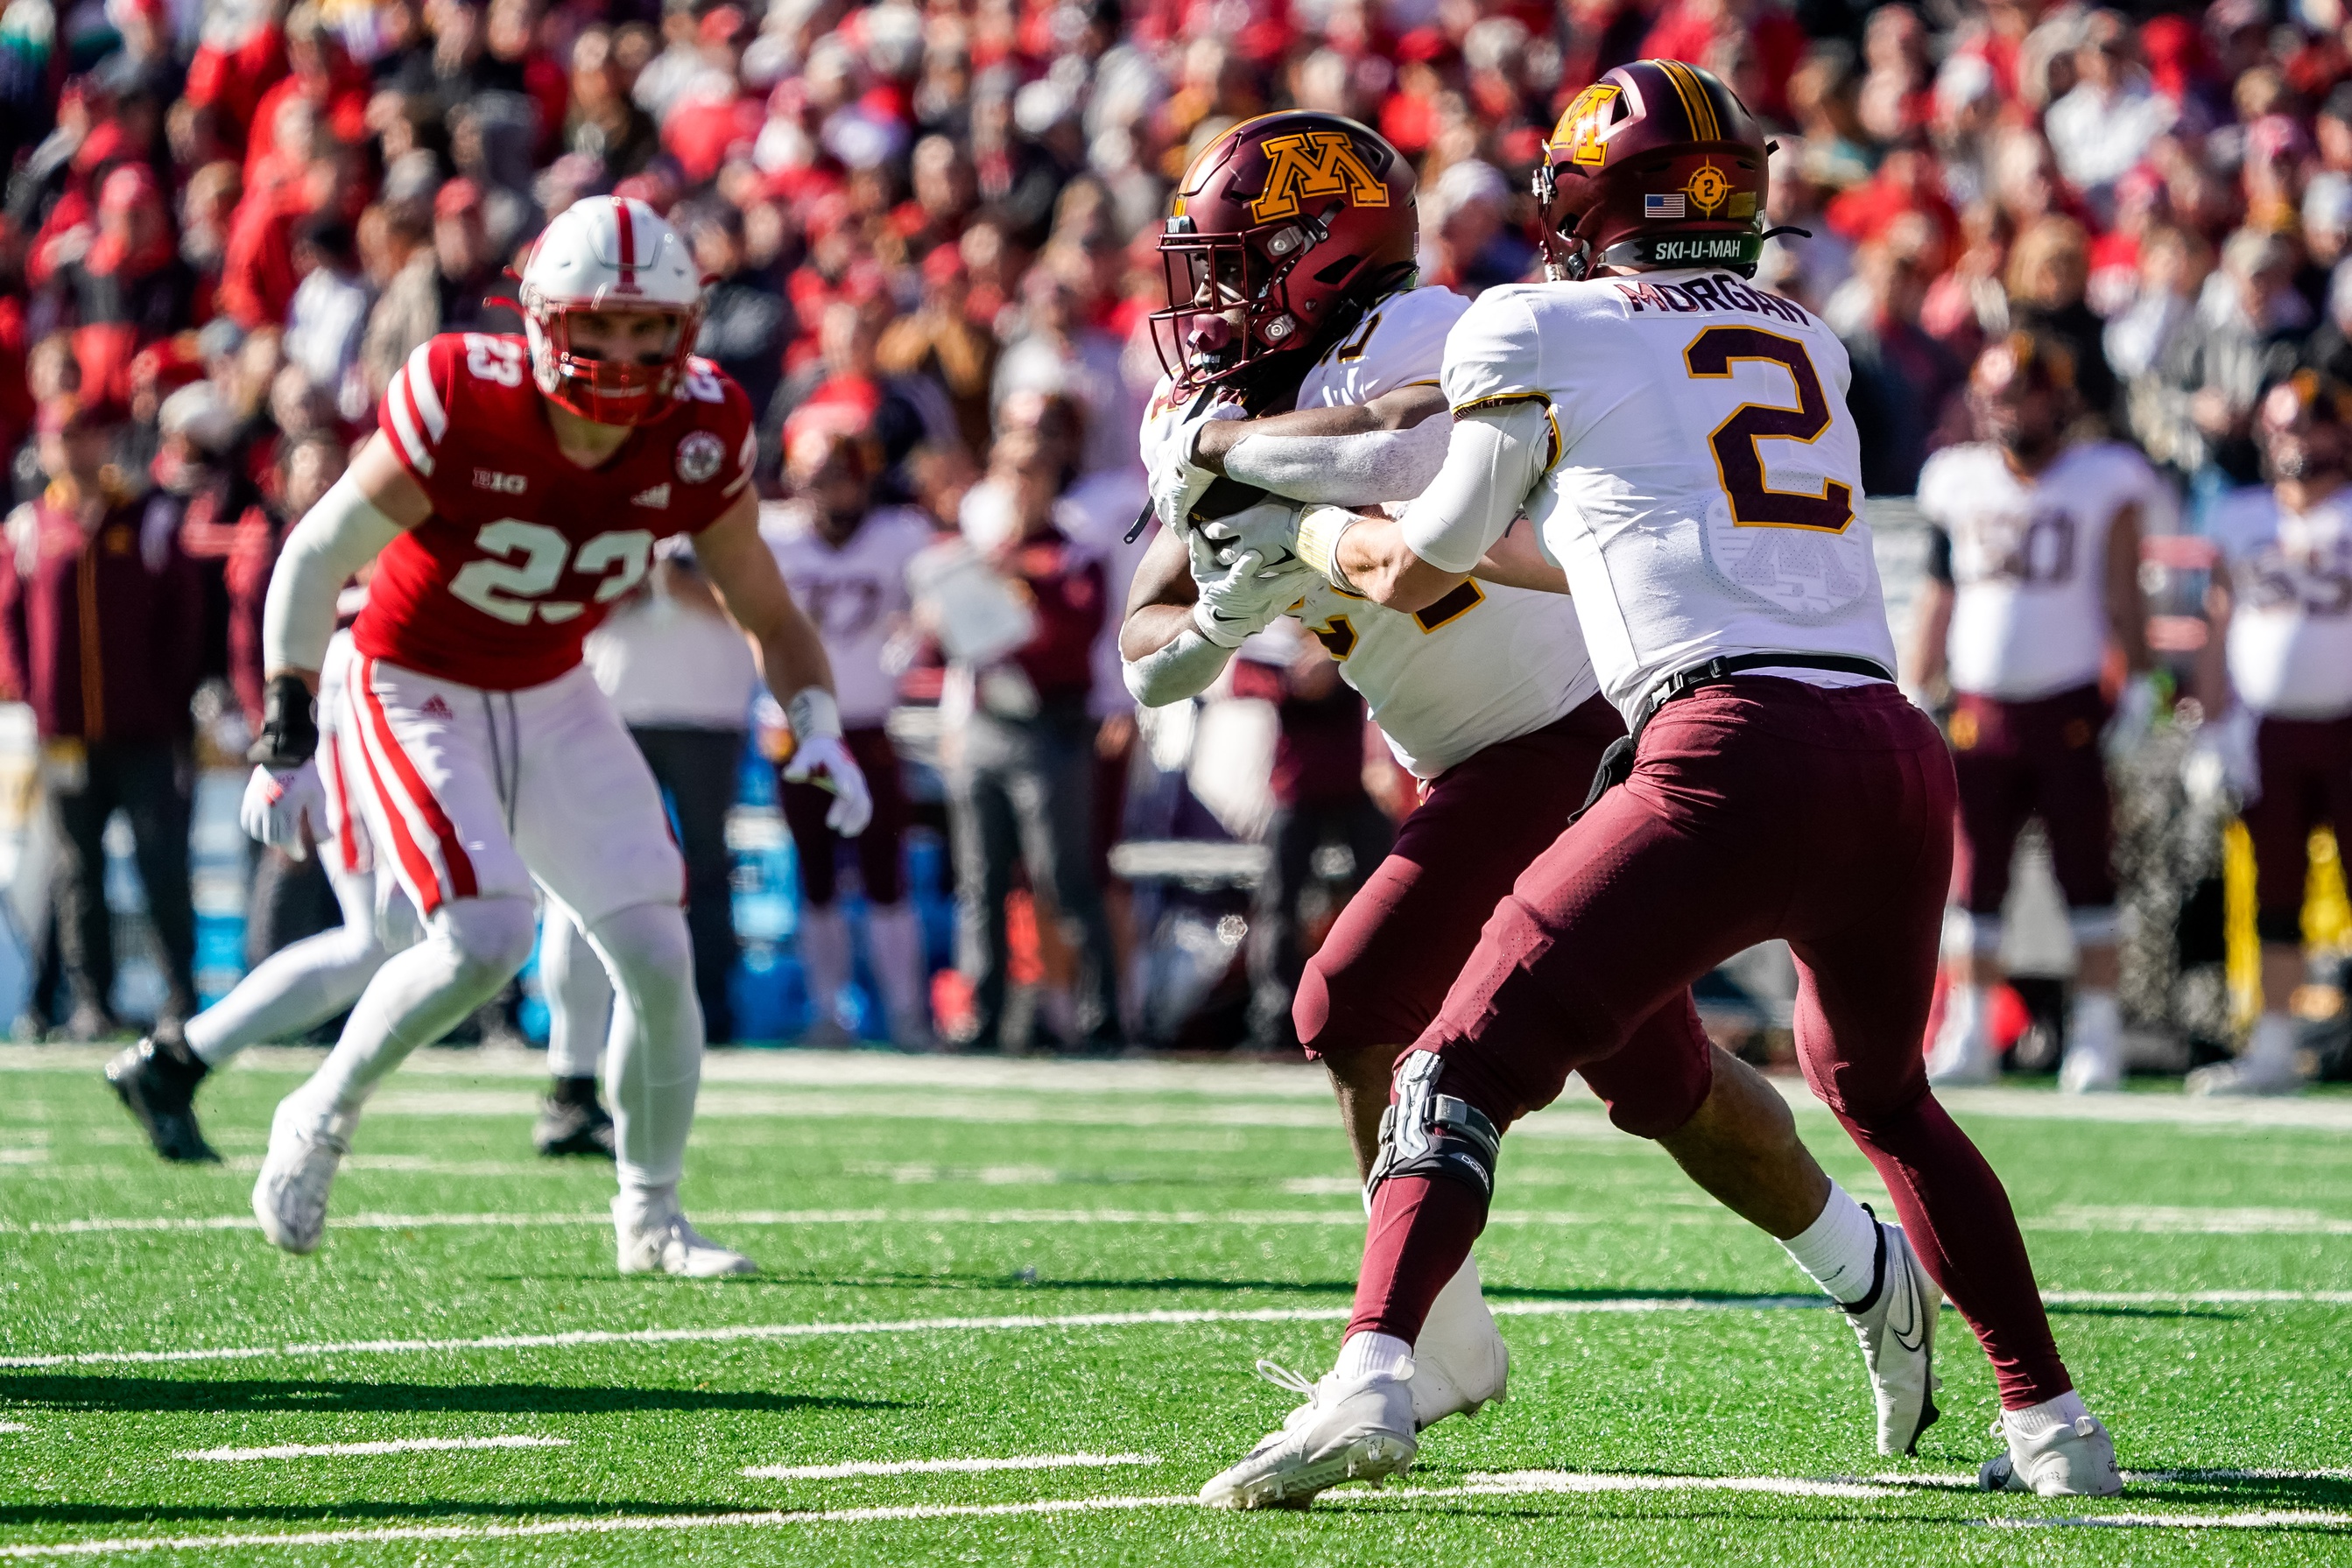 5 things that stood out in the Gophers’ win over Nebraska